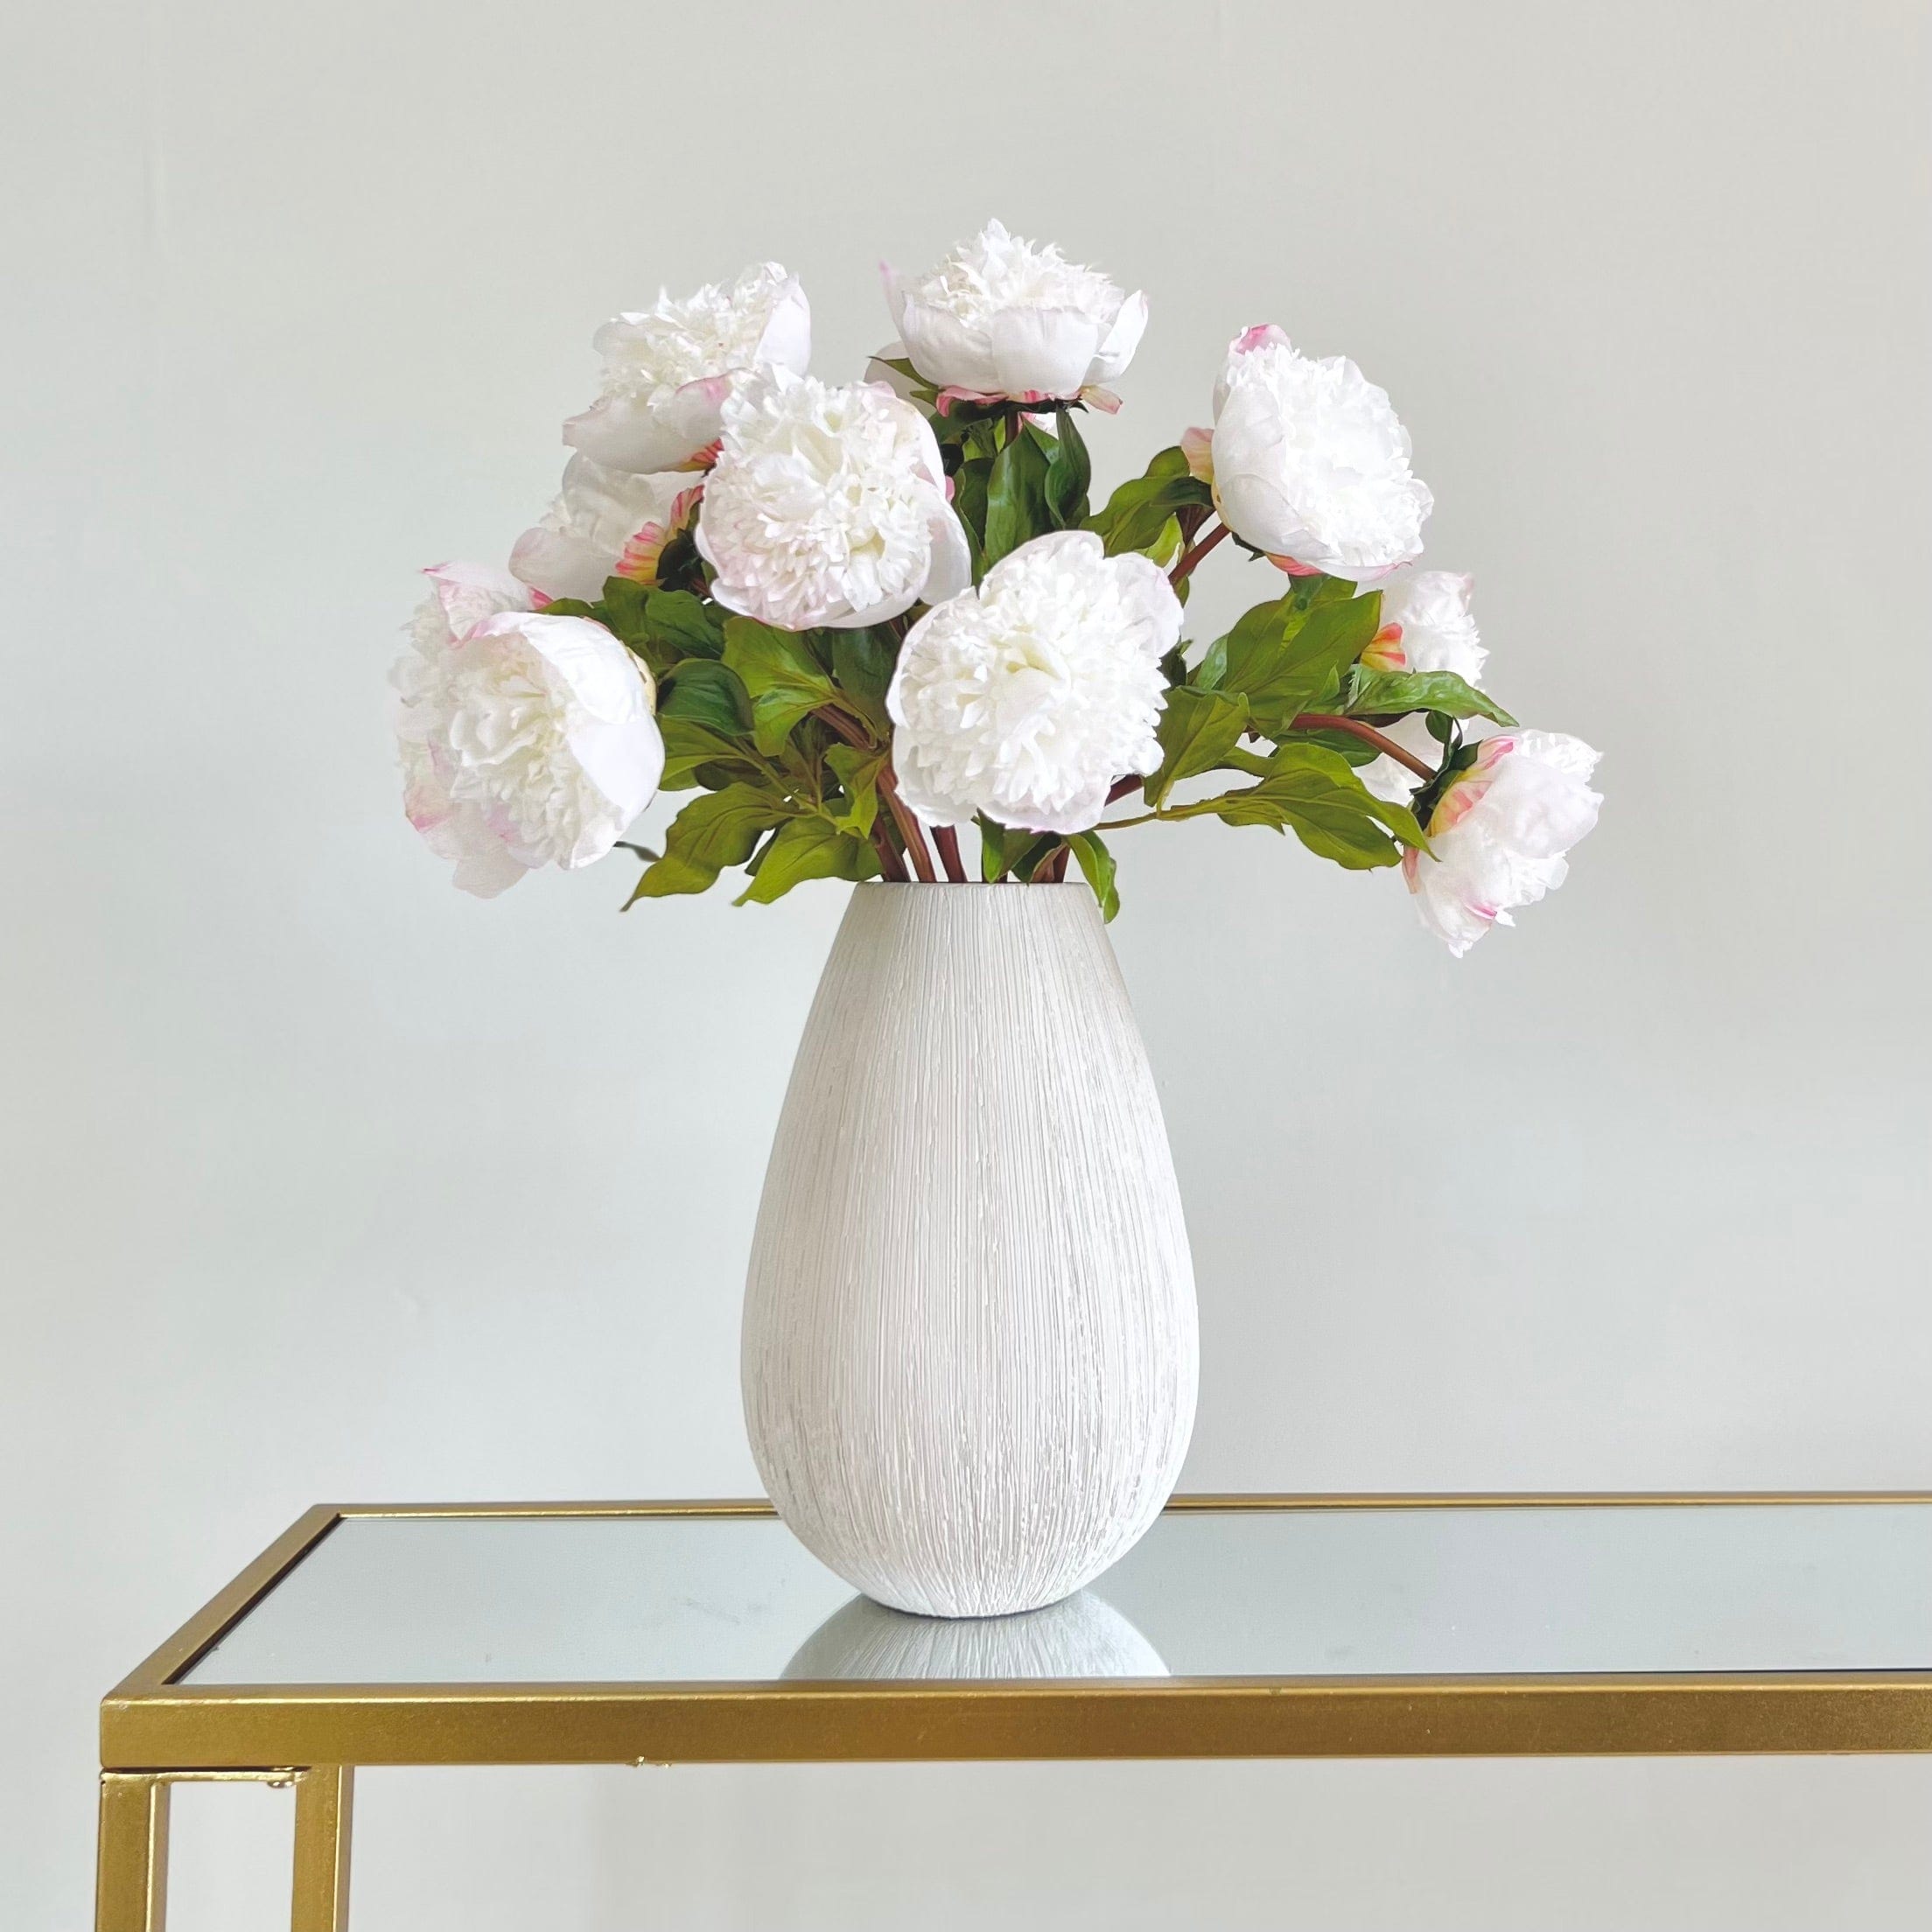 Artificial flowers luxury faux silk small white peony bibury vase lifelike realistic faux flowers ABP1513 ABY4236WH